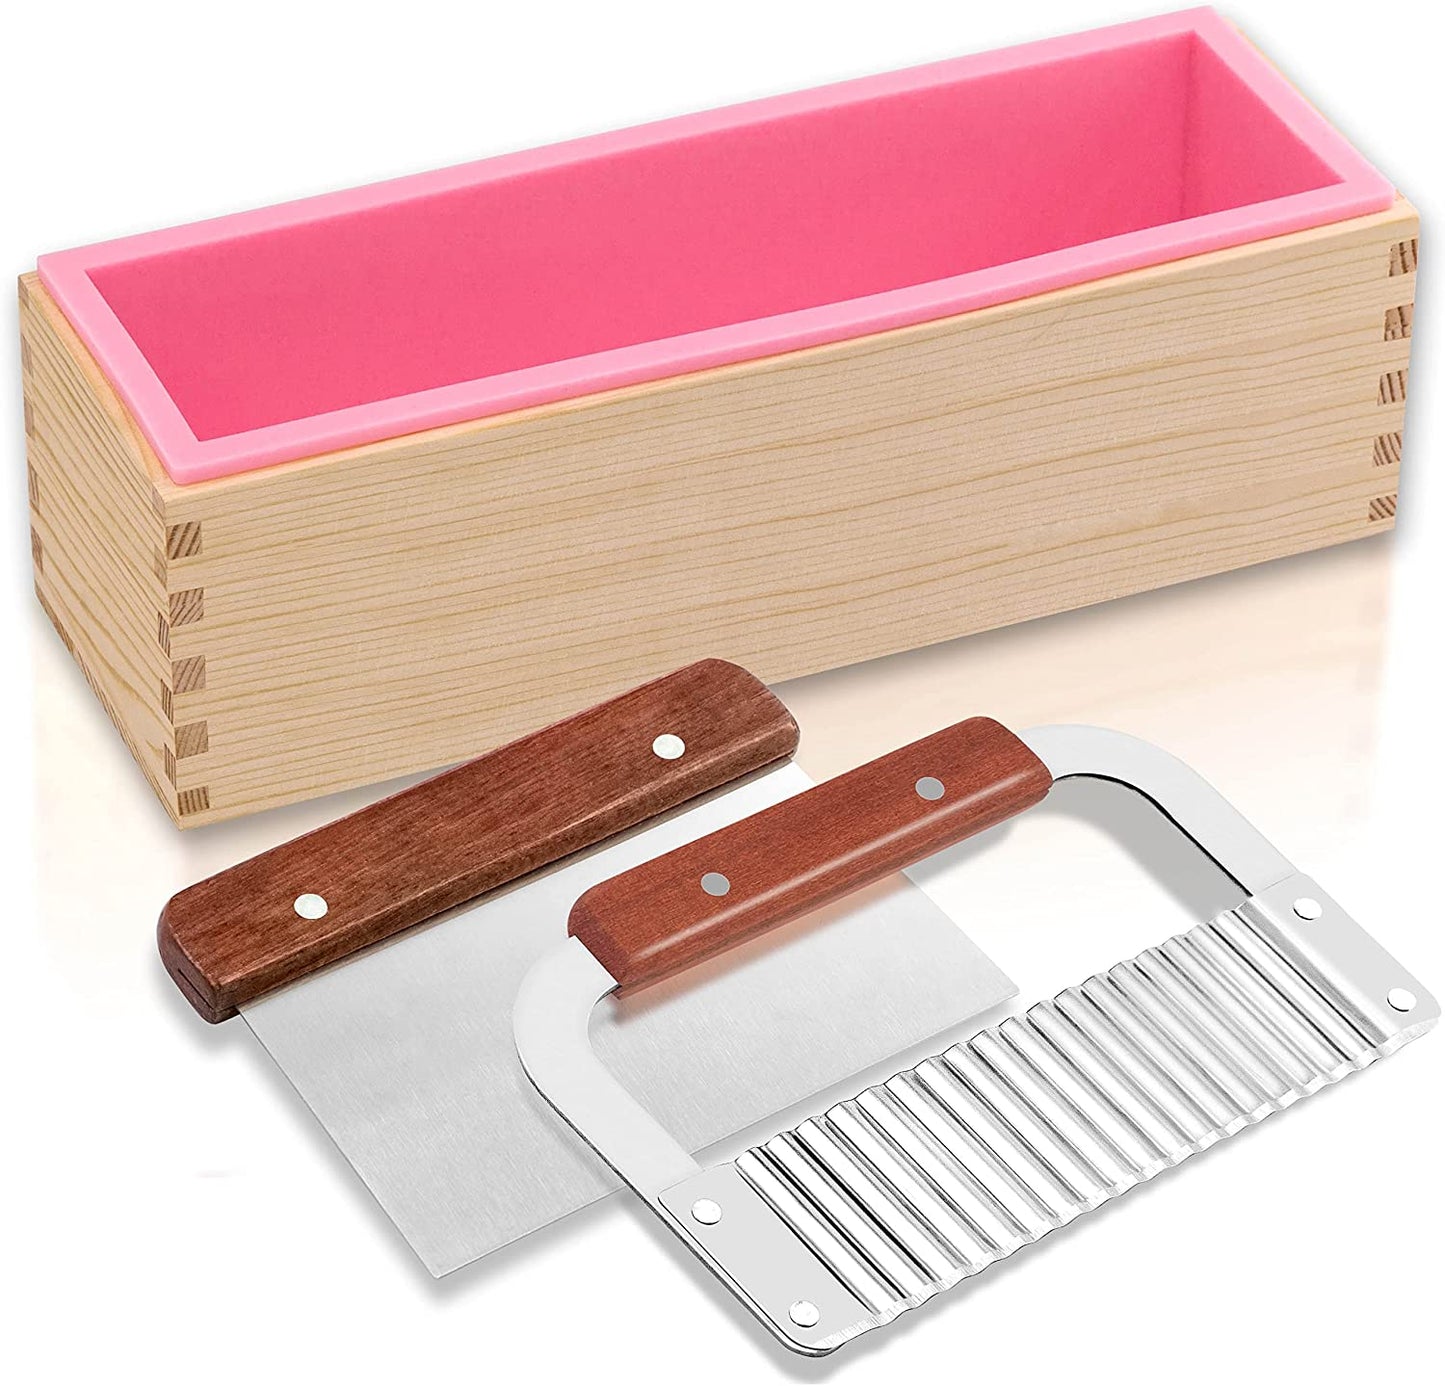 Rectangular Soap Mold Kit with Cutter- 42Oz Flexible Silicone Loaf Soap Mold with Wood Box, Stainless Steel Wavy & Straight Scraper for Homemade Craft Soap Making Supplies